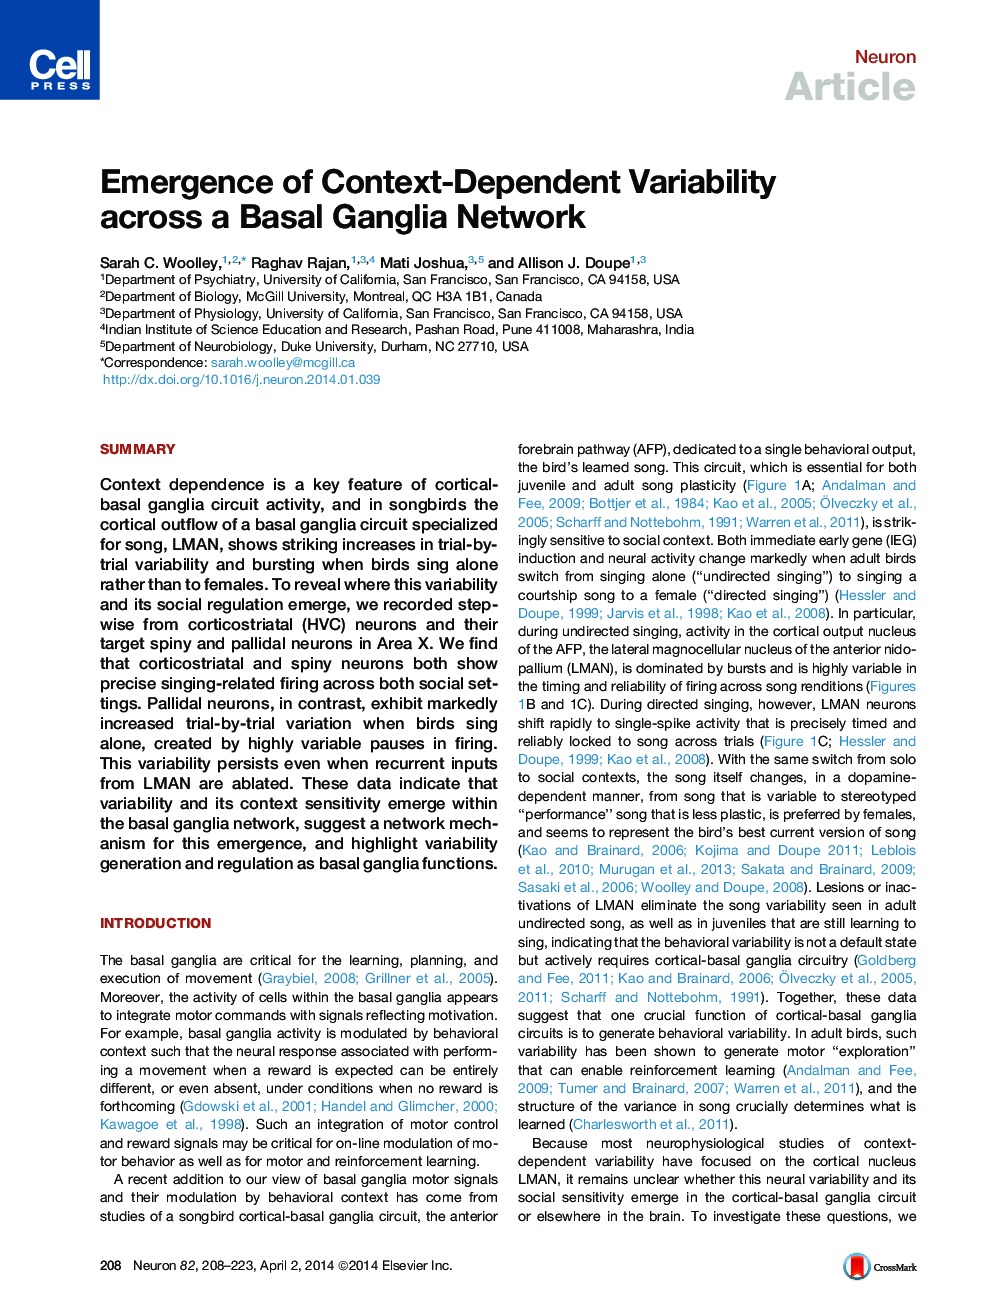 Emergence of Context-Dependent Variability across a Basal Ganglia Network